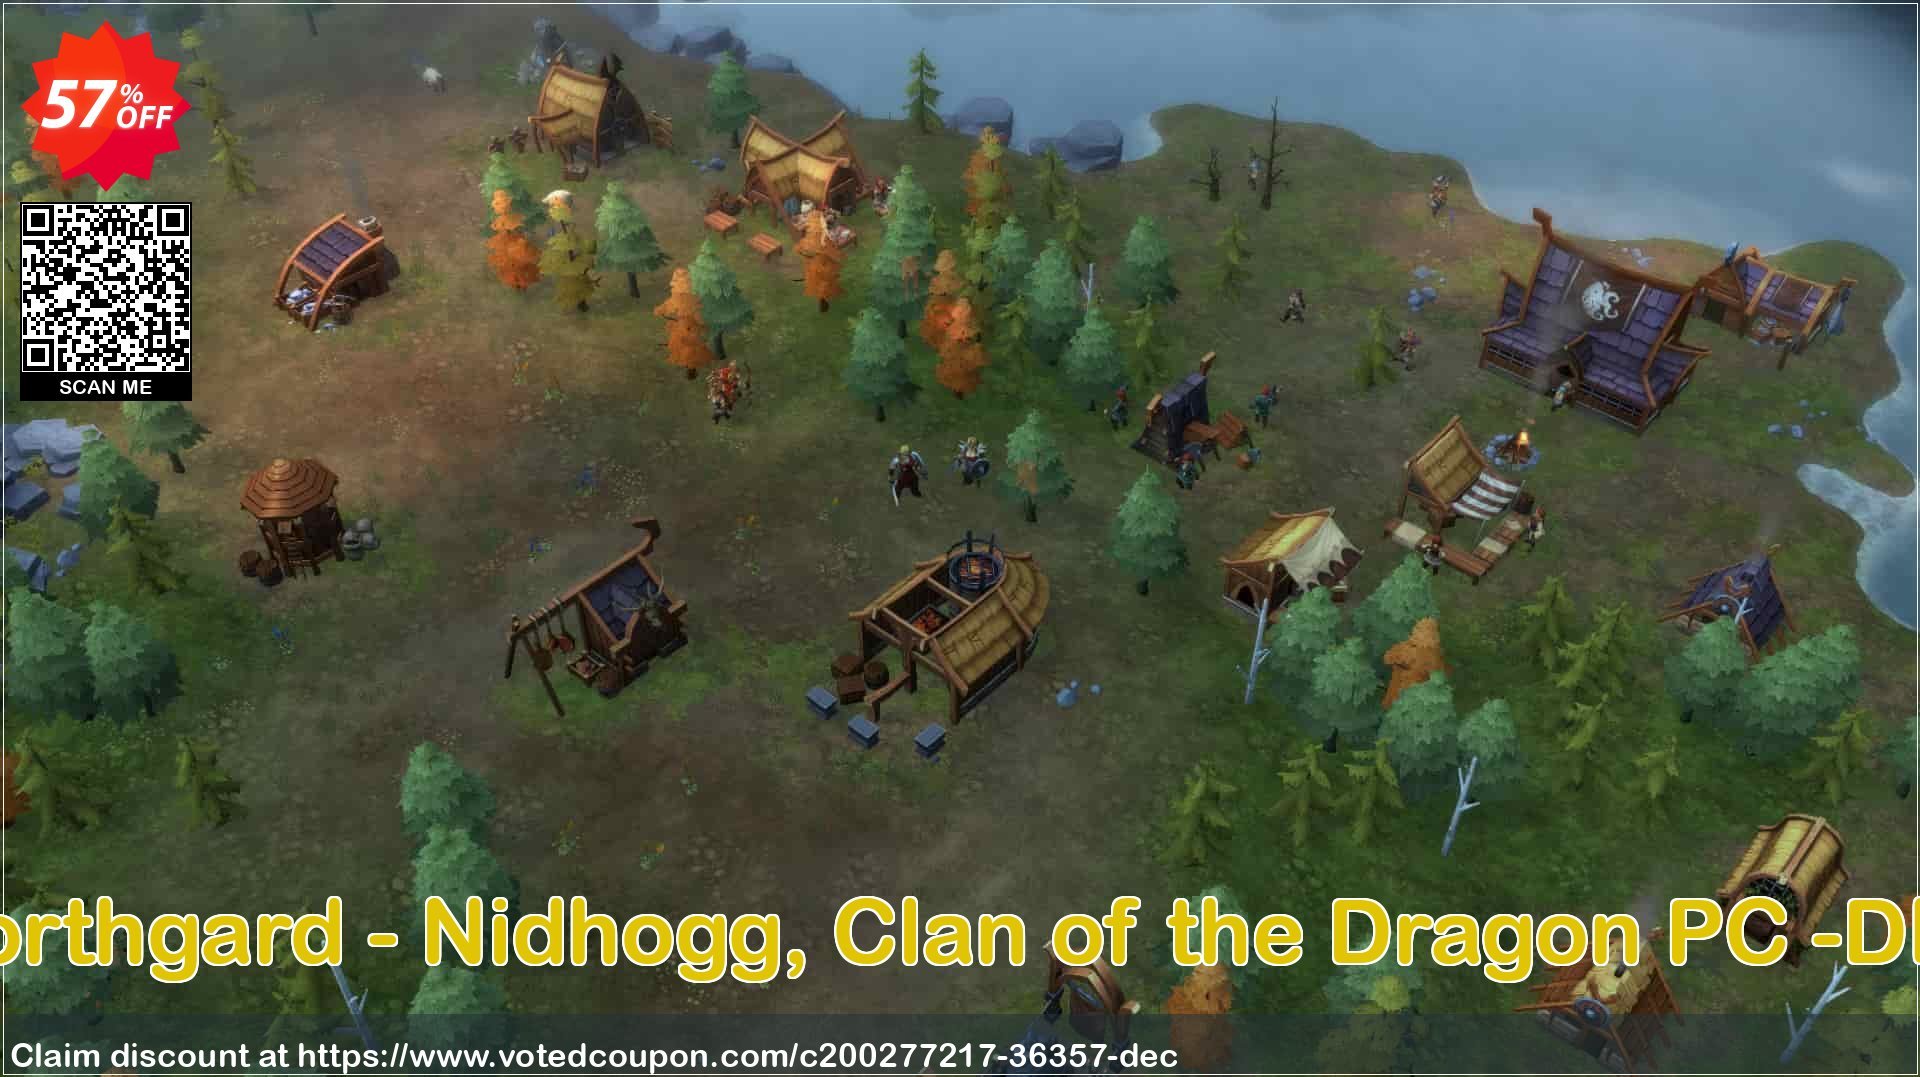 Northgard - Nidhogg, Clan of the Dragon PC -DLC Coupon Code May 2024, 57% OFF - VotedCoupon